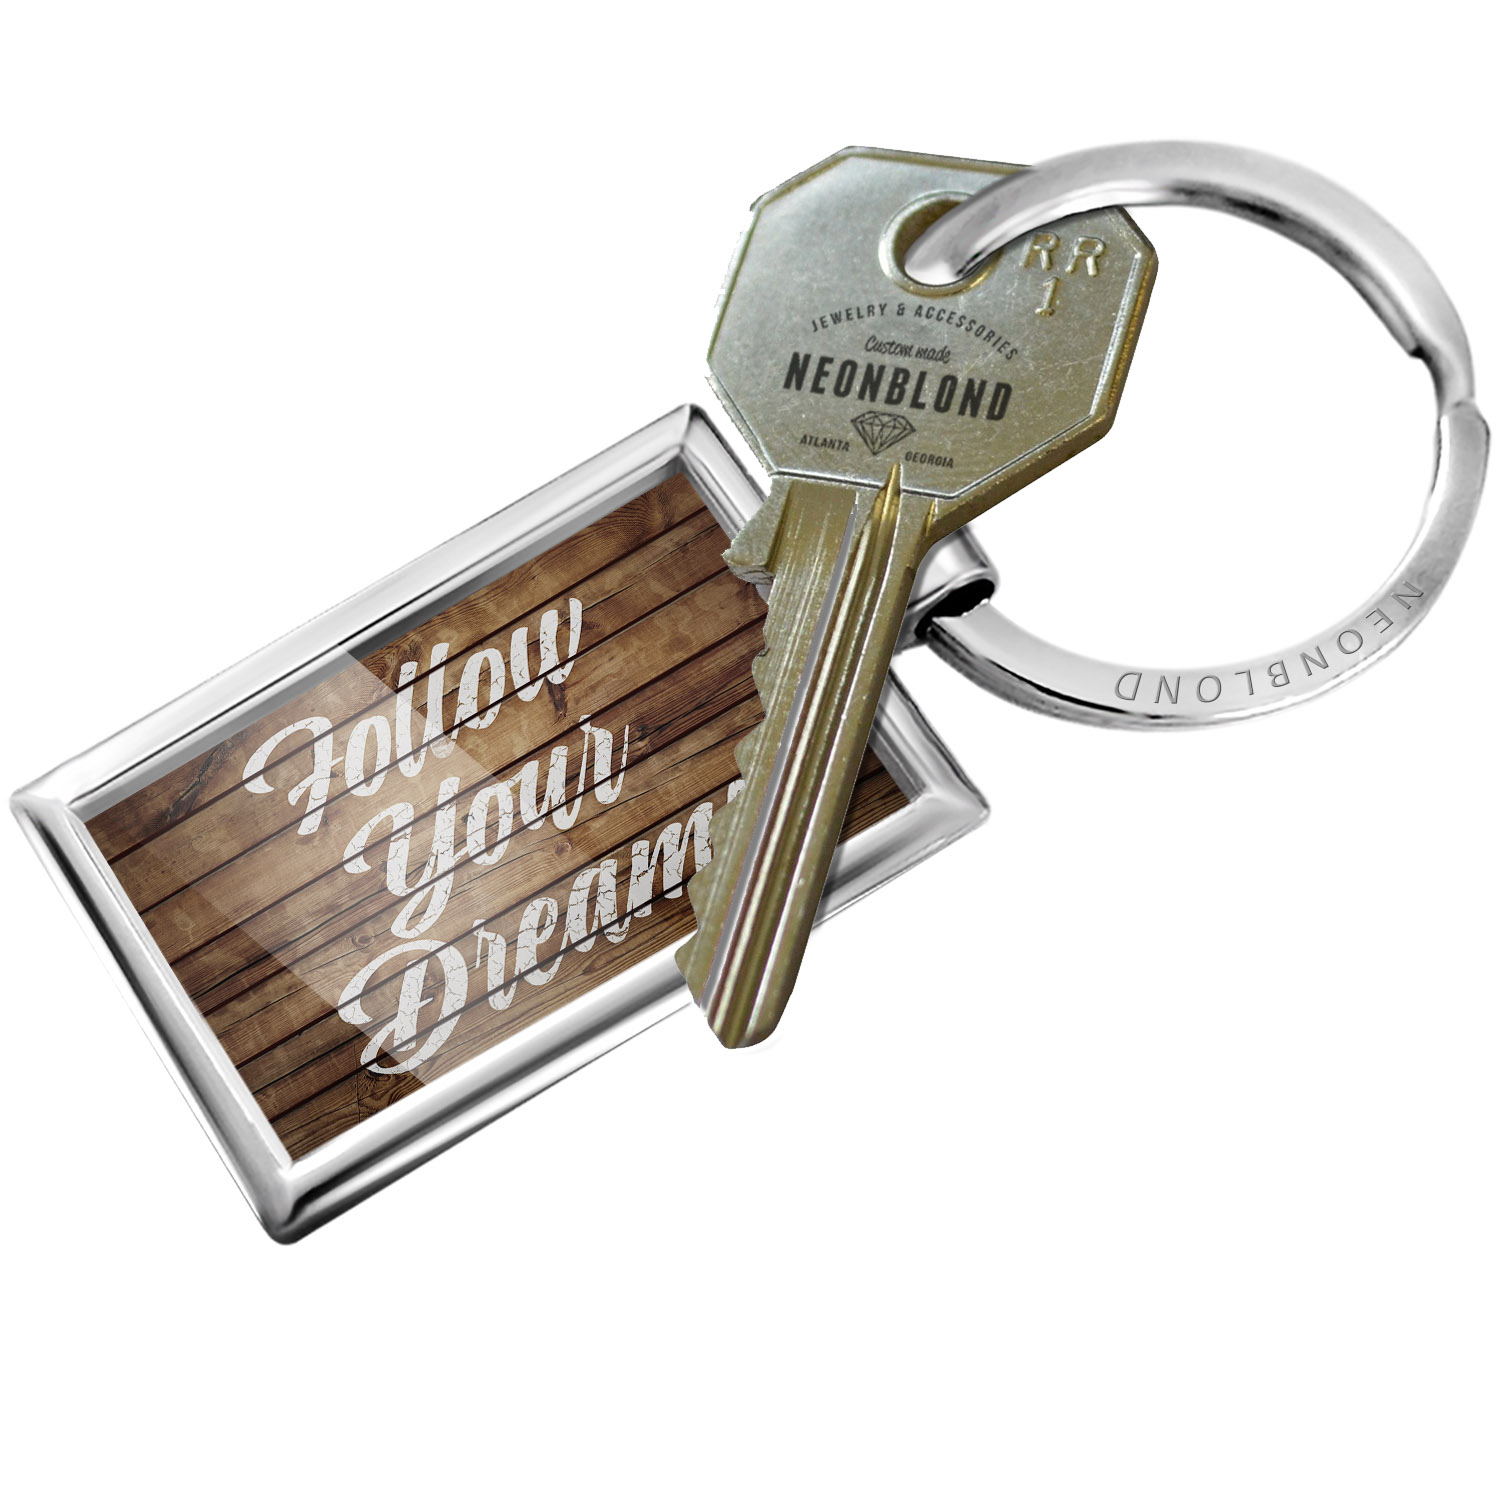 NEONBLOND Keychain Painted Wood Follow Your Dreams - image 1 of 1